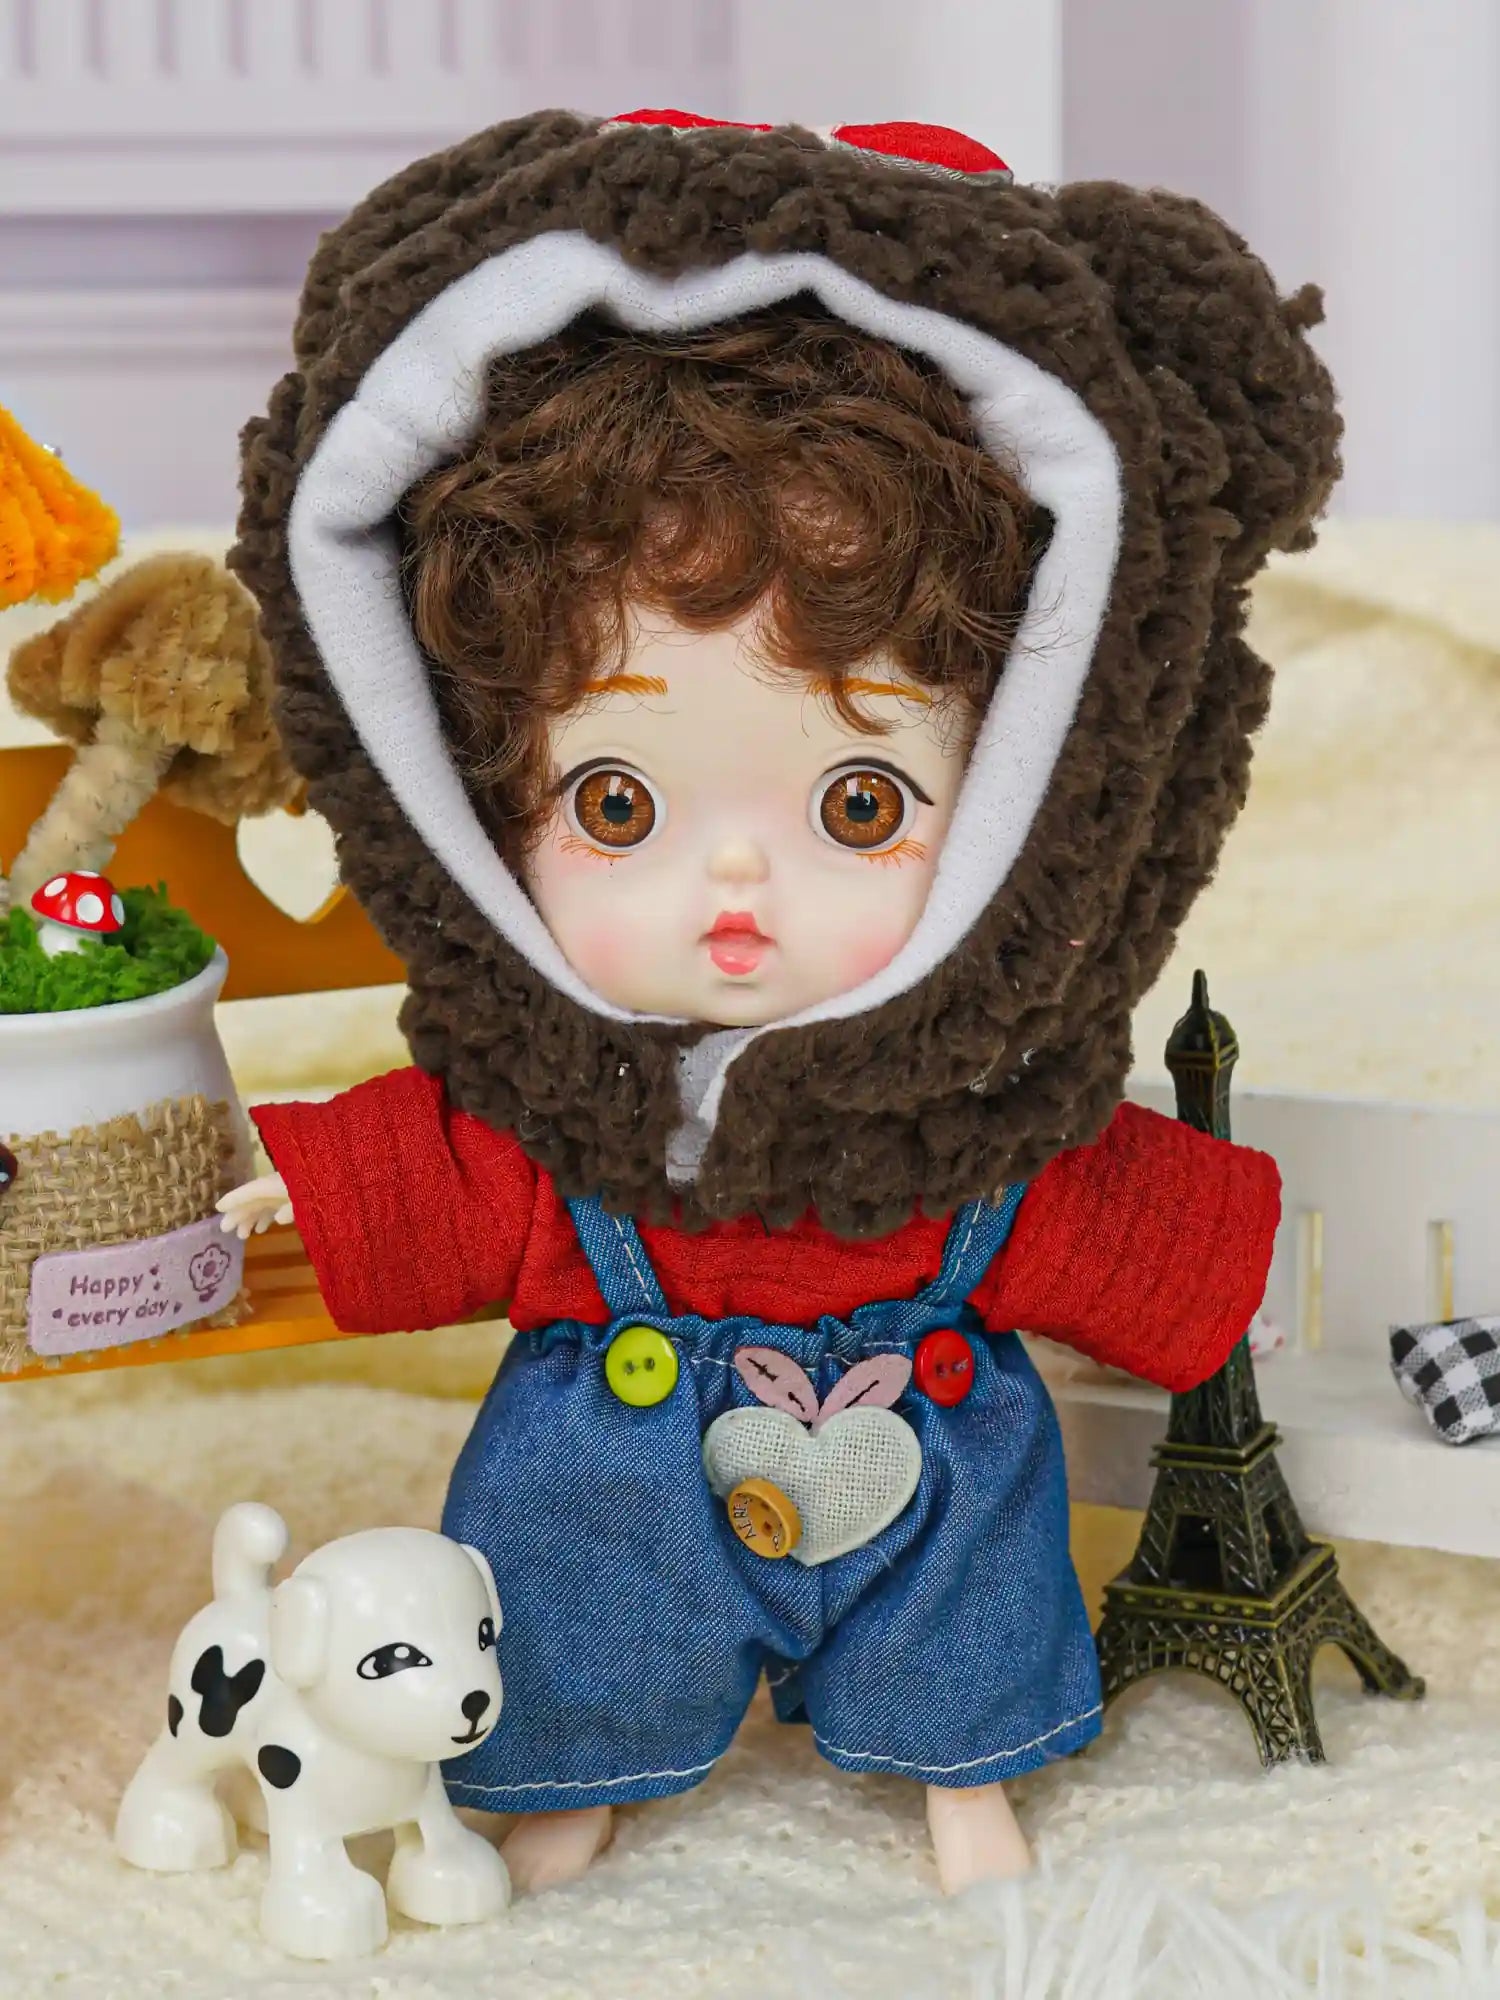 A playful doll in a brown bear cap, with a small Eiffel Tower and a toy dog adding charm to the scene.